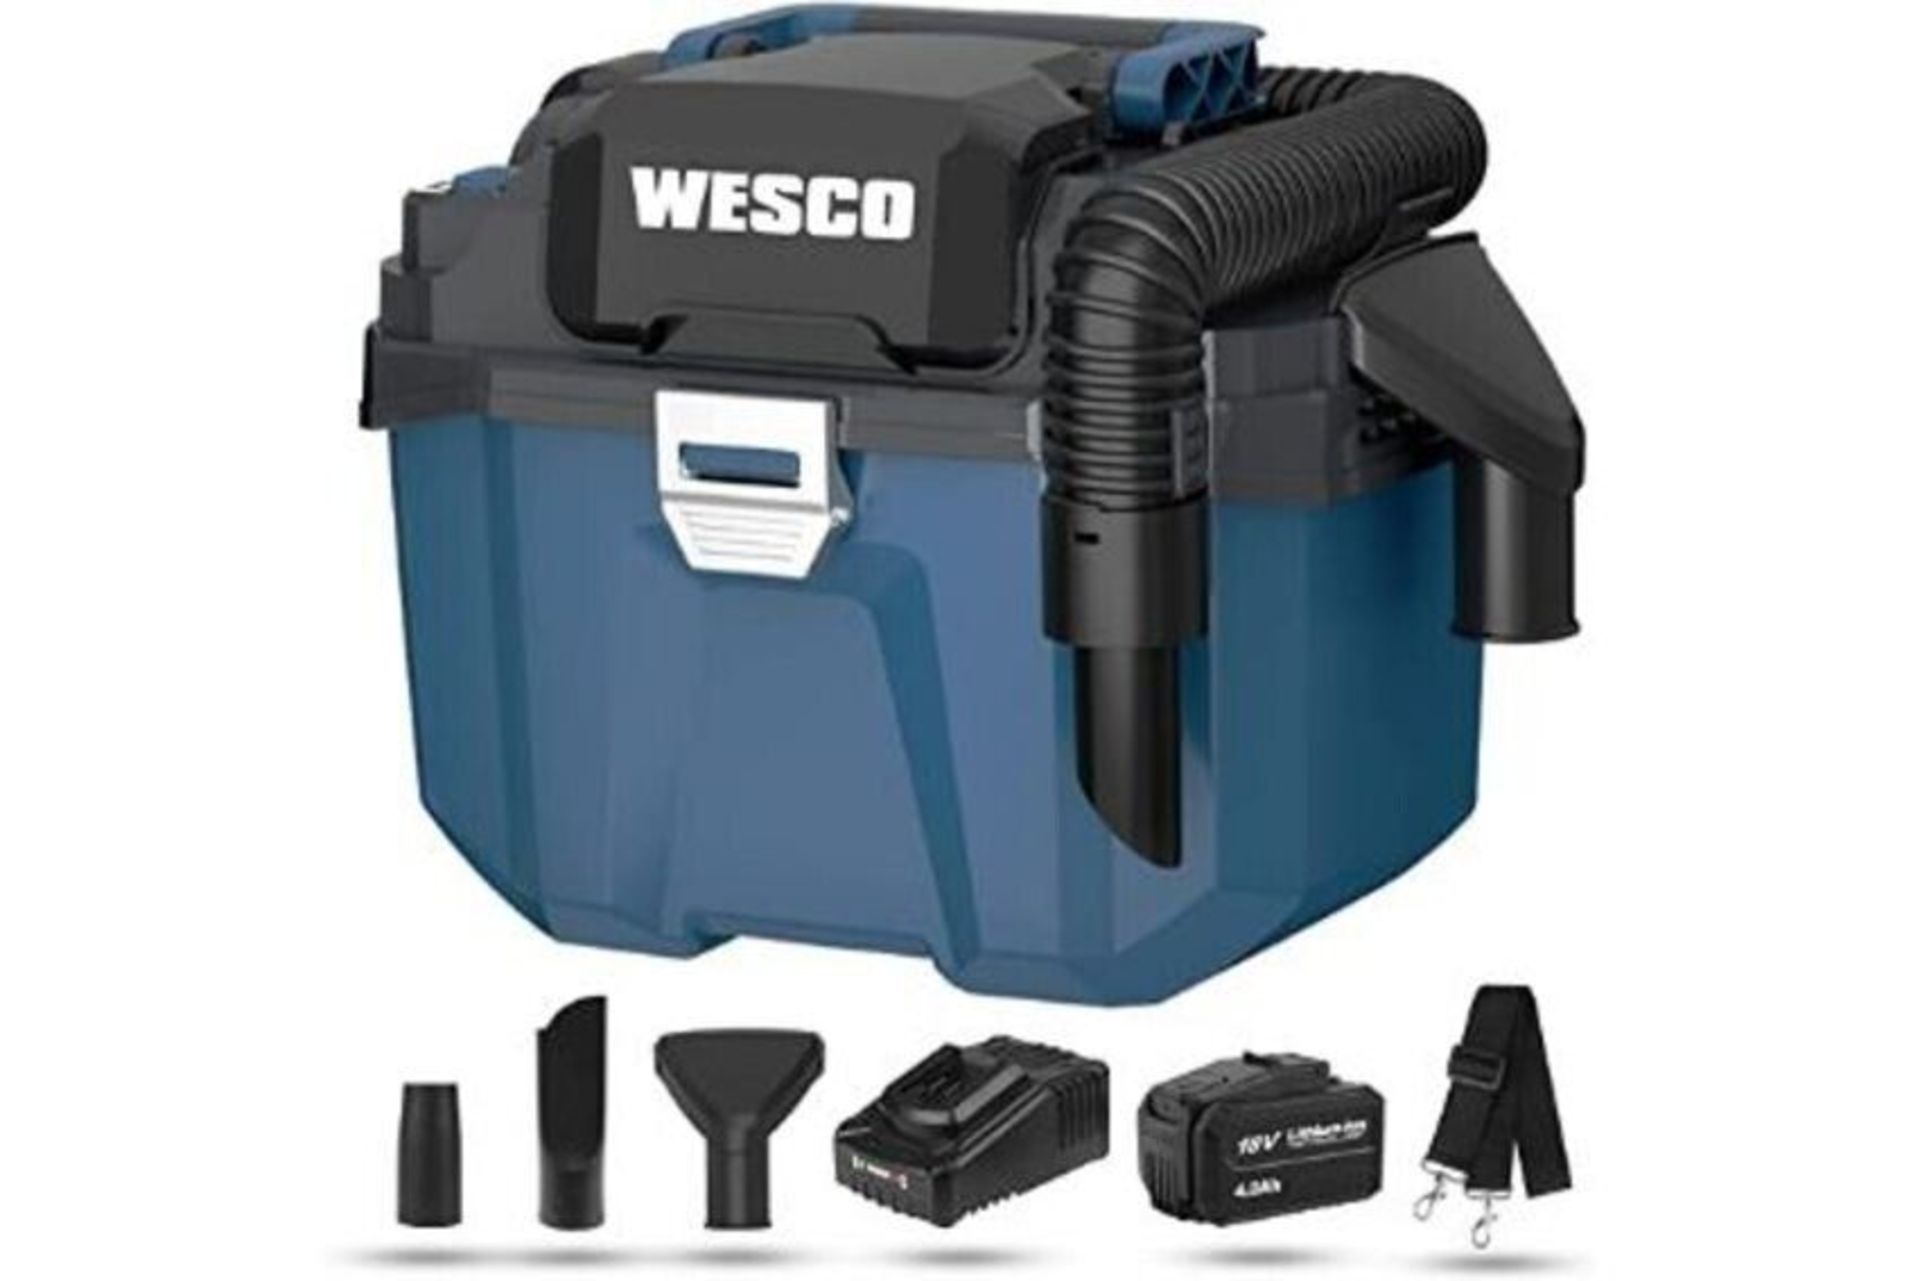 NEW BOXED WESCO Wet and Dry Vacuum Cleaner, Cordless Wet Dry Vacuum Cleaner, 3.6 kg Compact Wet-